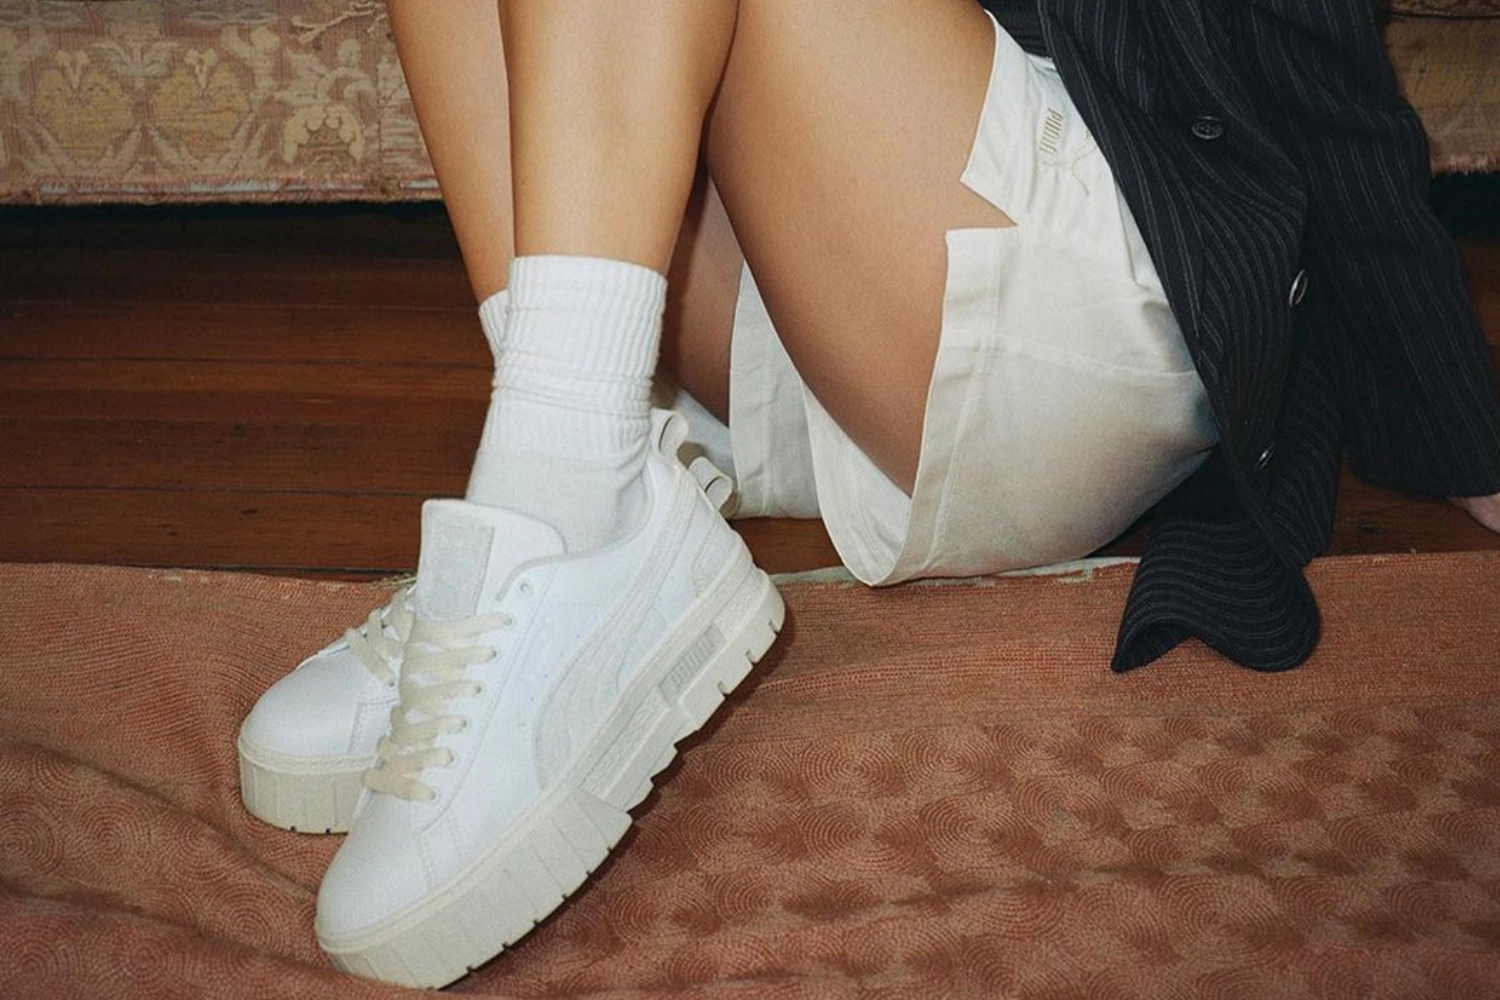 The most popular white sneakers and platform shoes at PUMA